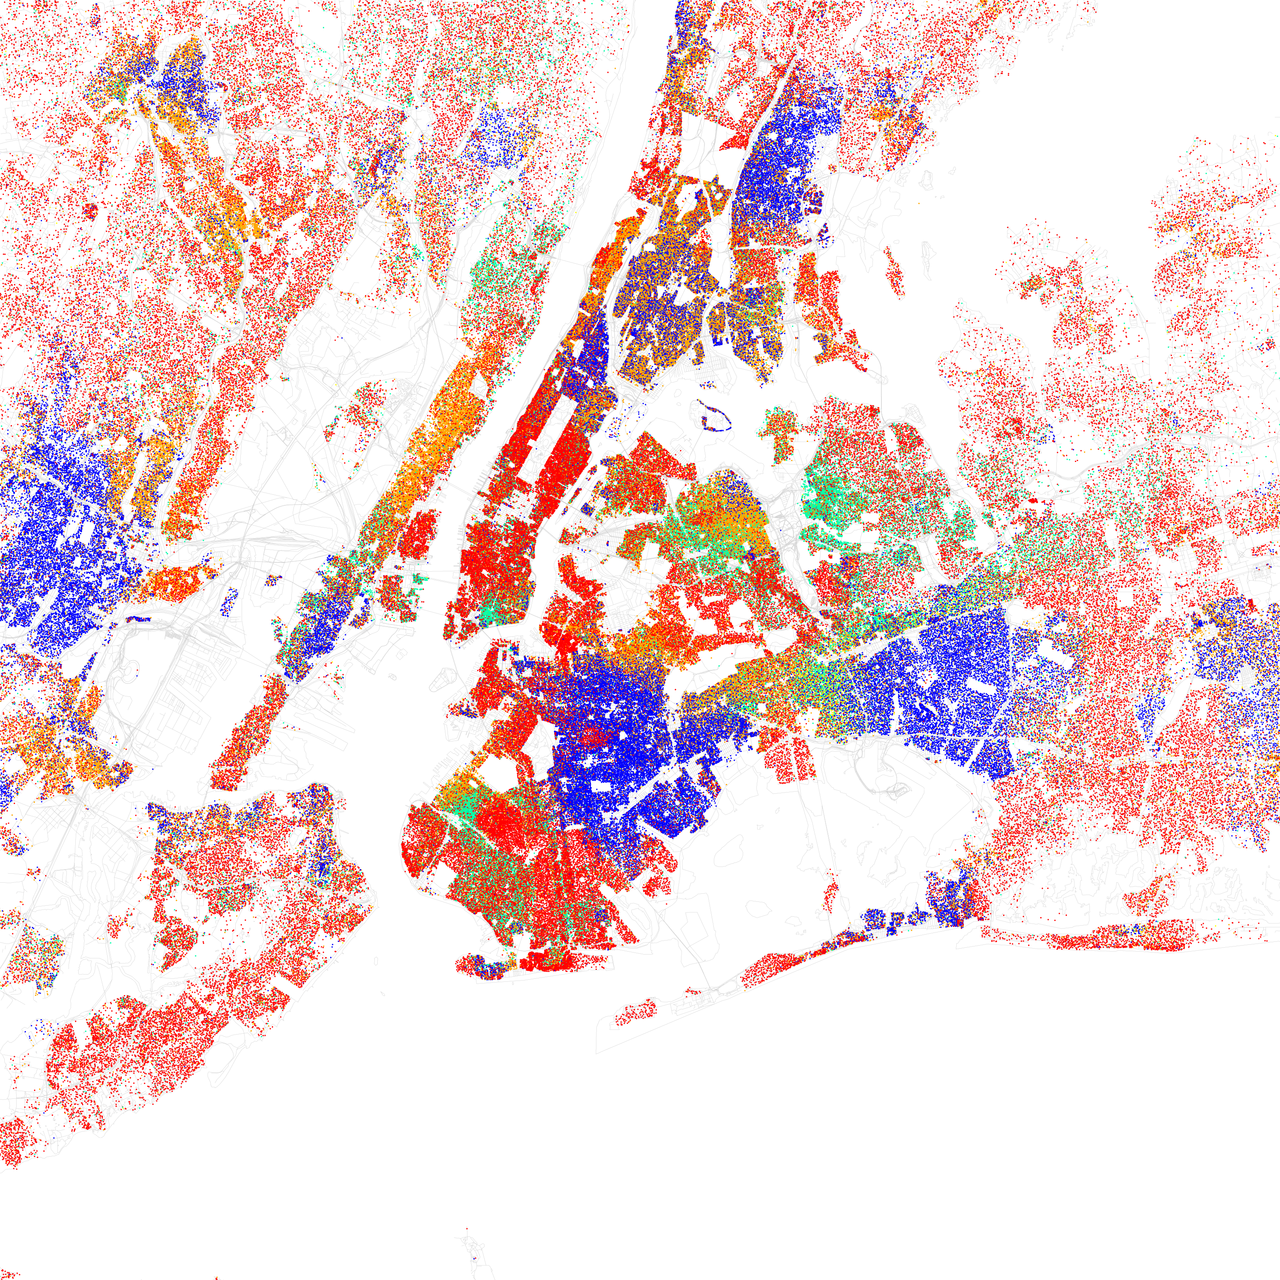 A map of the New York City area drawn from individual dots in different colors. The island of Manhatten is mostly composed of red dots with a green cluster near the south and a larger area with blue and orange dots in the north. Other areas have larger clusters of primarily blue, orange, and red dots.